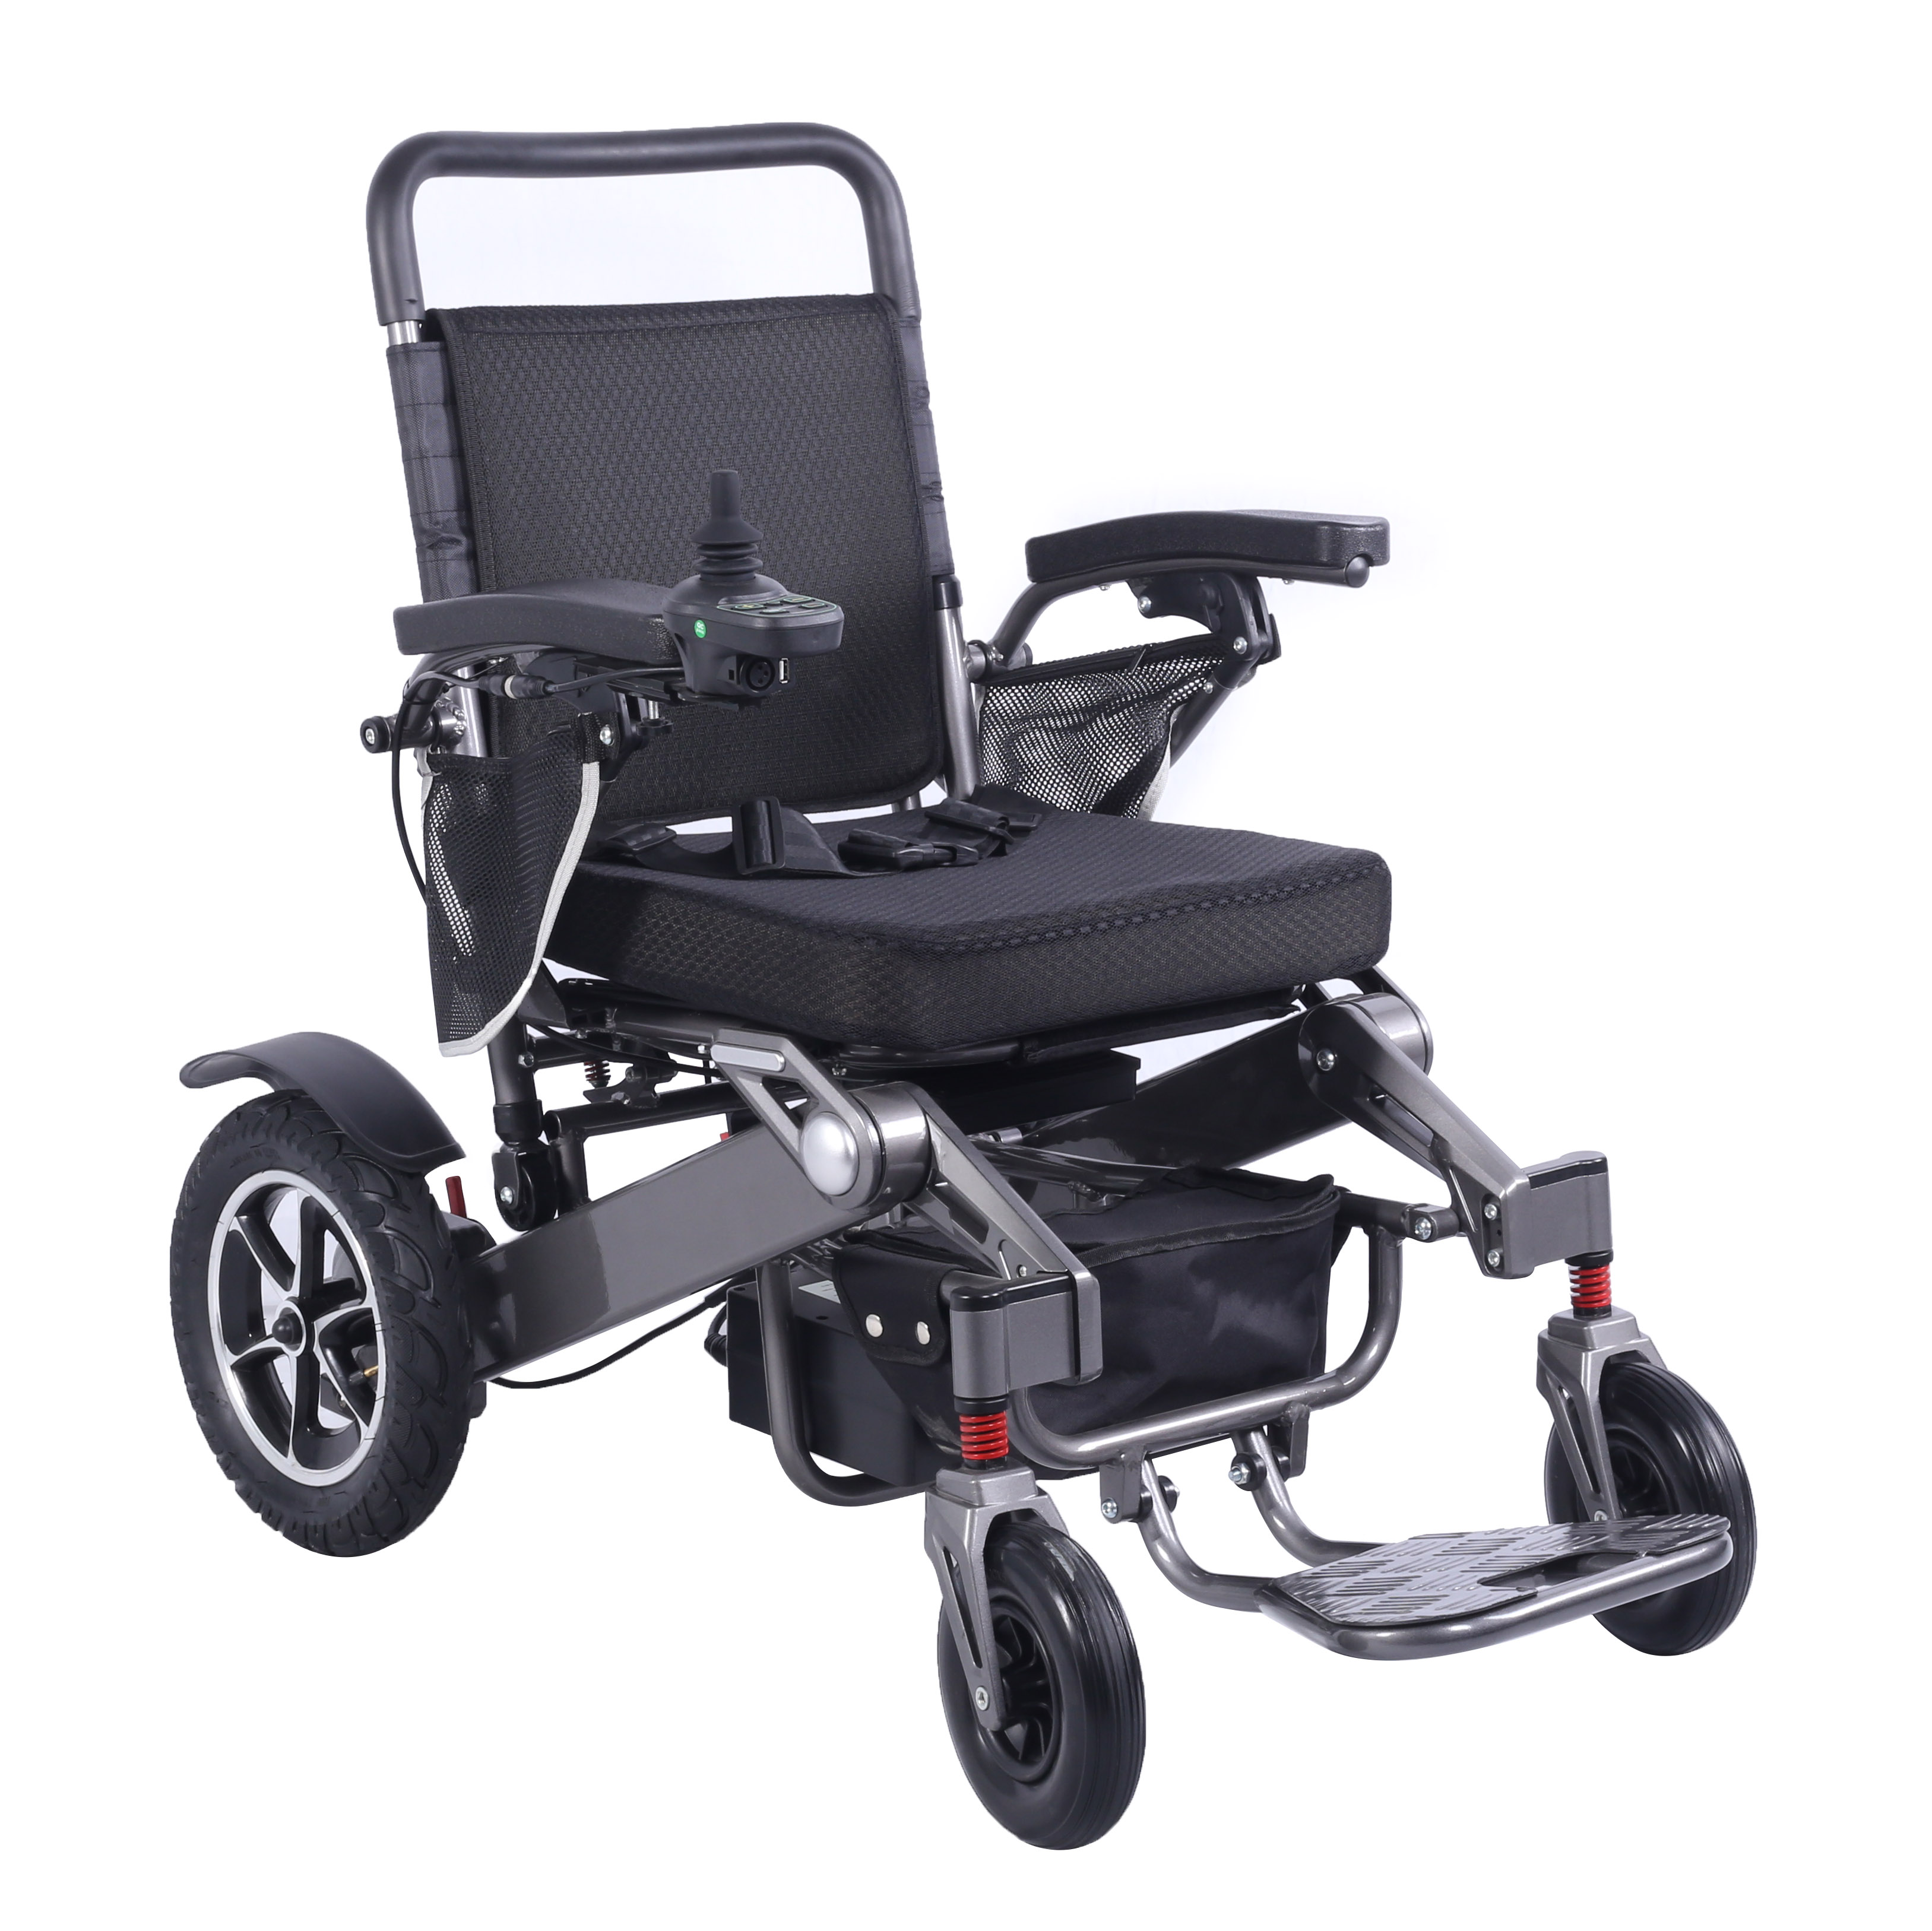 Bc Ea9000 Electric Wheelchair Lightweight Remote Wheelchair Electric Handicapped Electric Mobility Wheelchair3